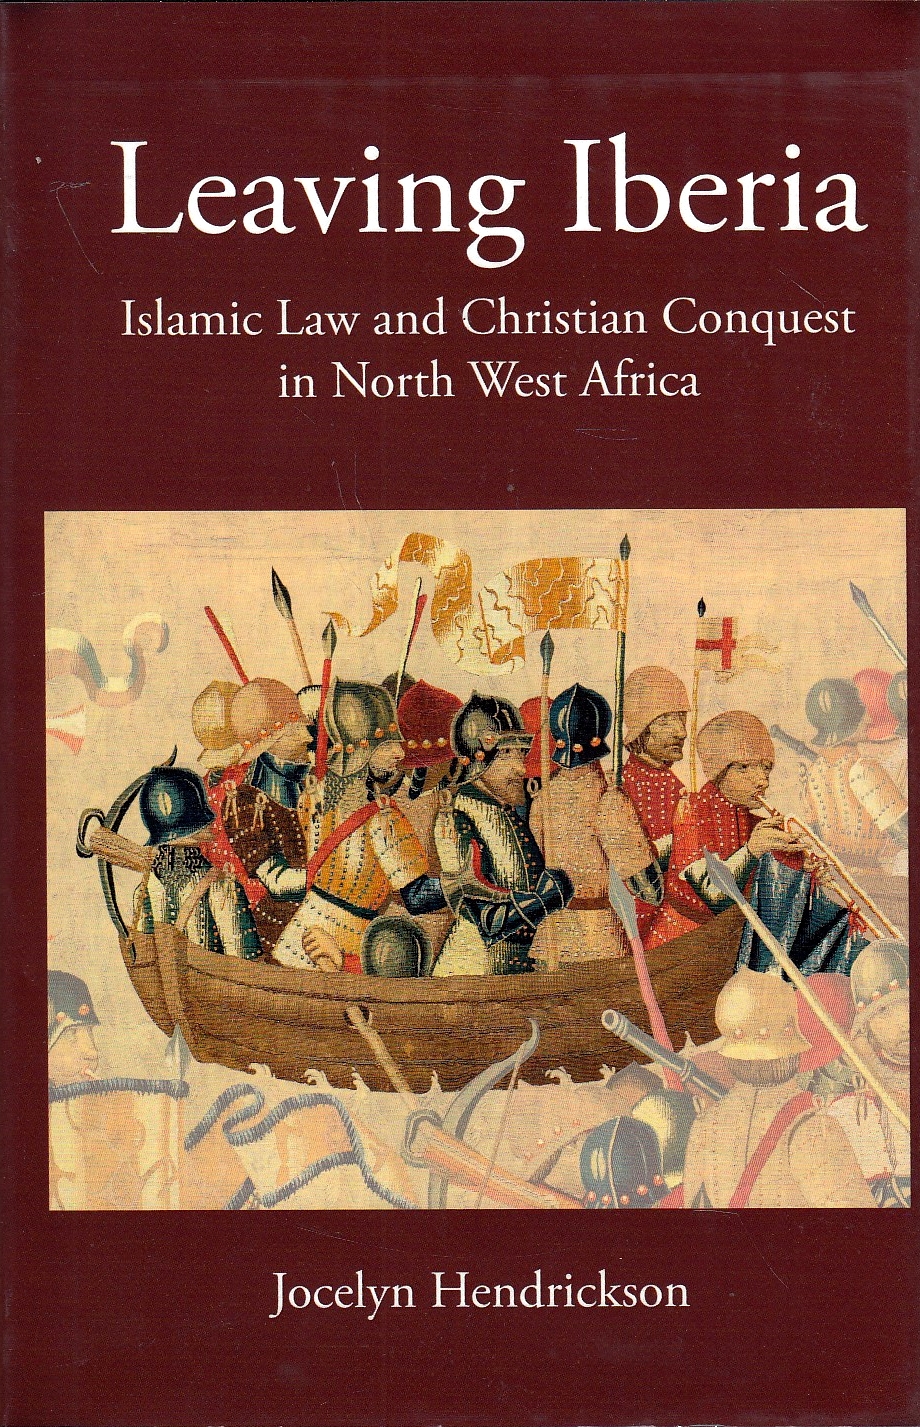 Leaving Iberia: Islamic law and Christian Conquest in North West Africa.